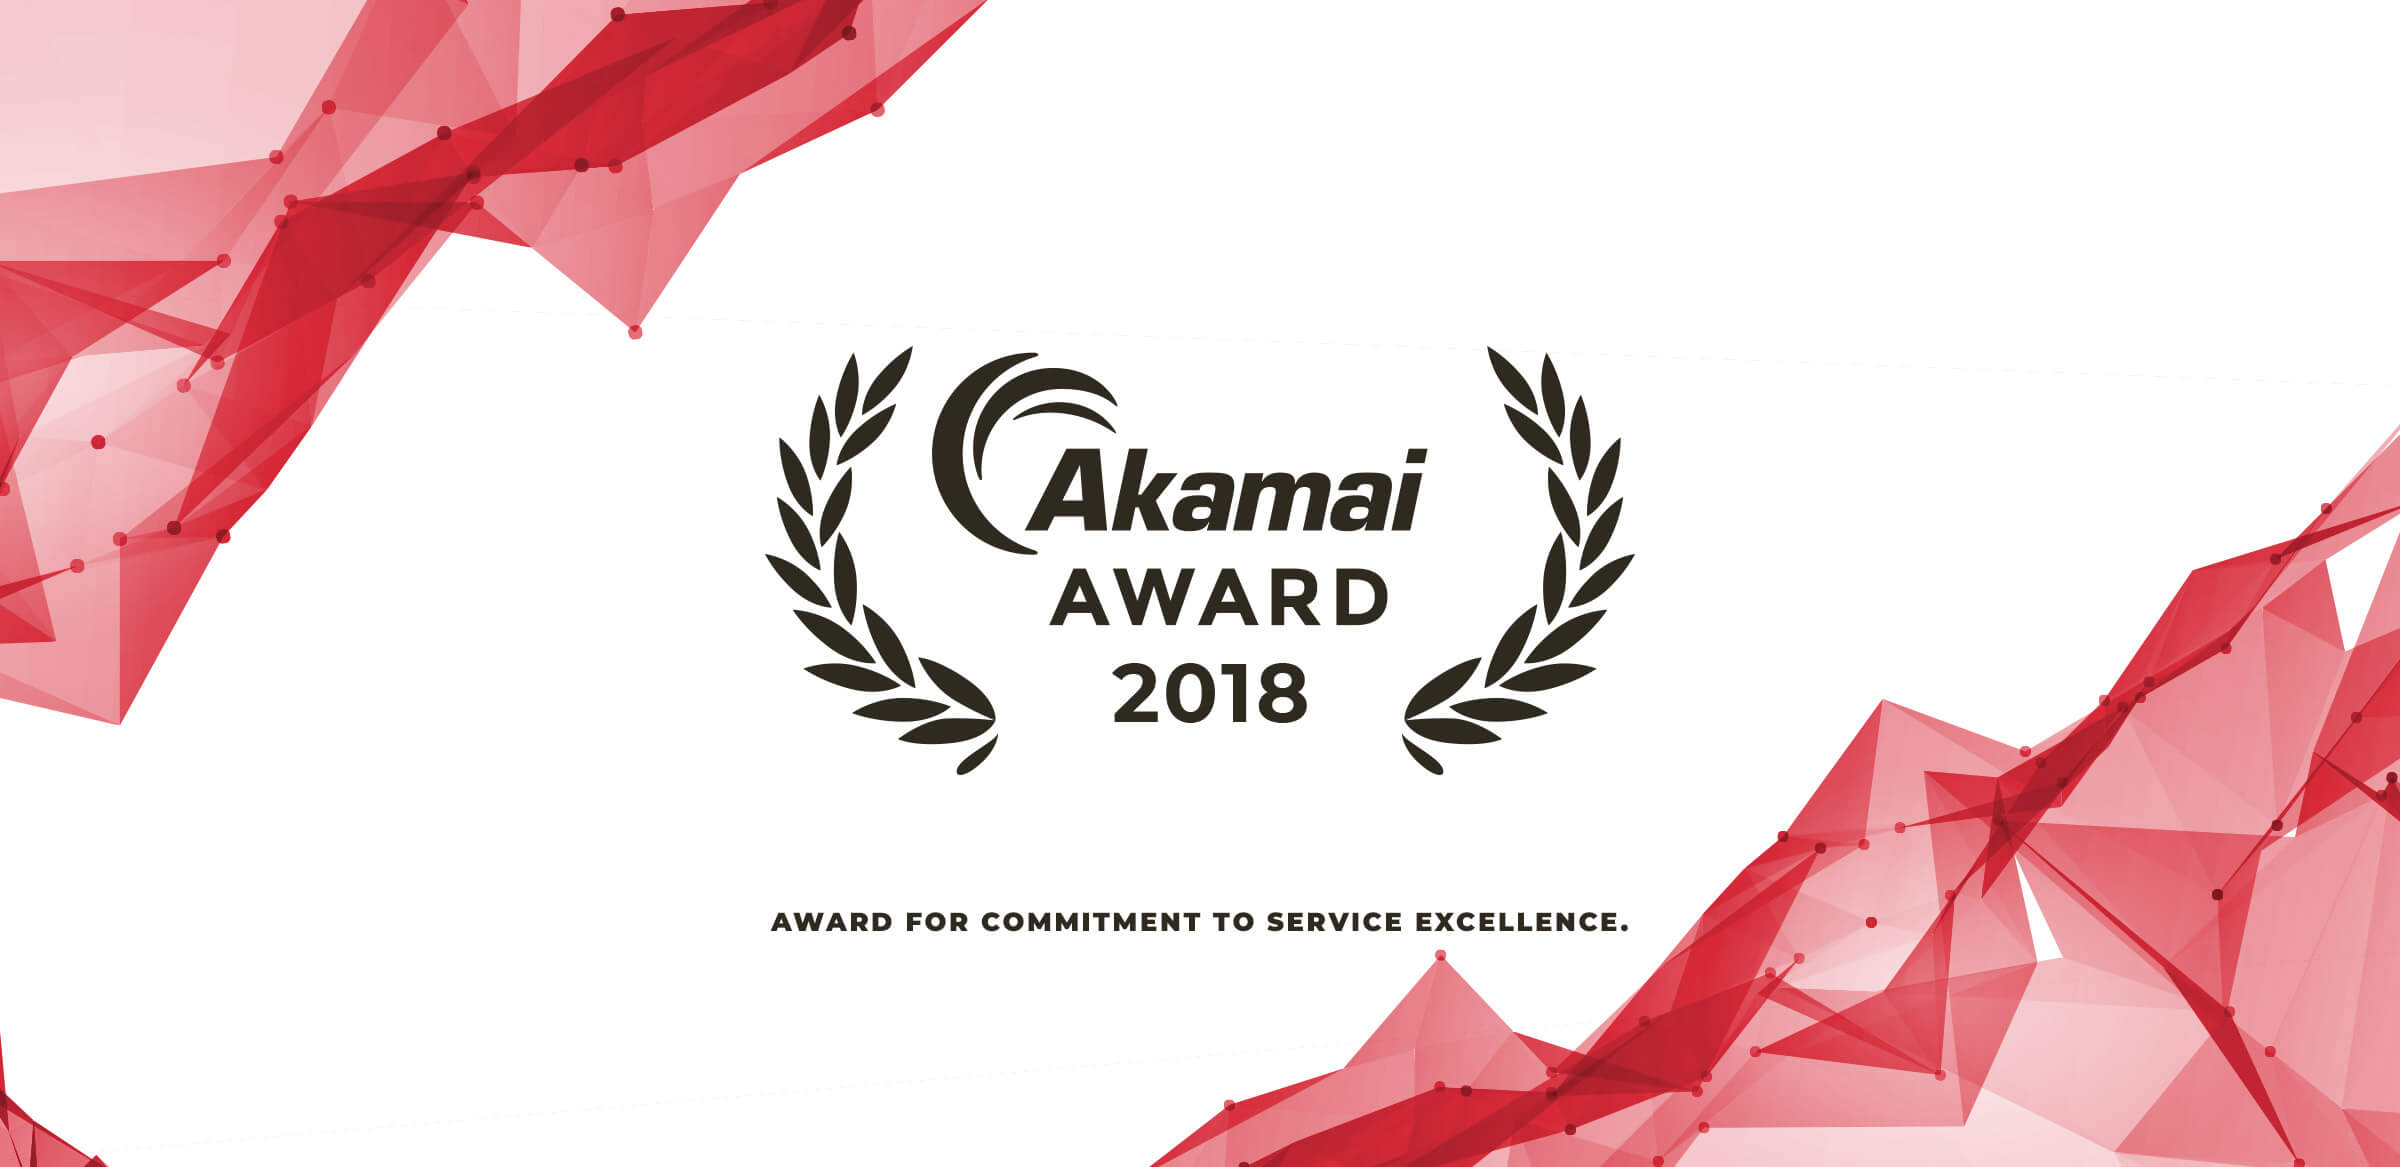 Arturai is proud to announce its Akamai 2018 Commitment to Service Excellence Award winning.